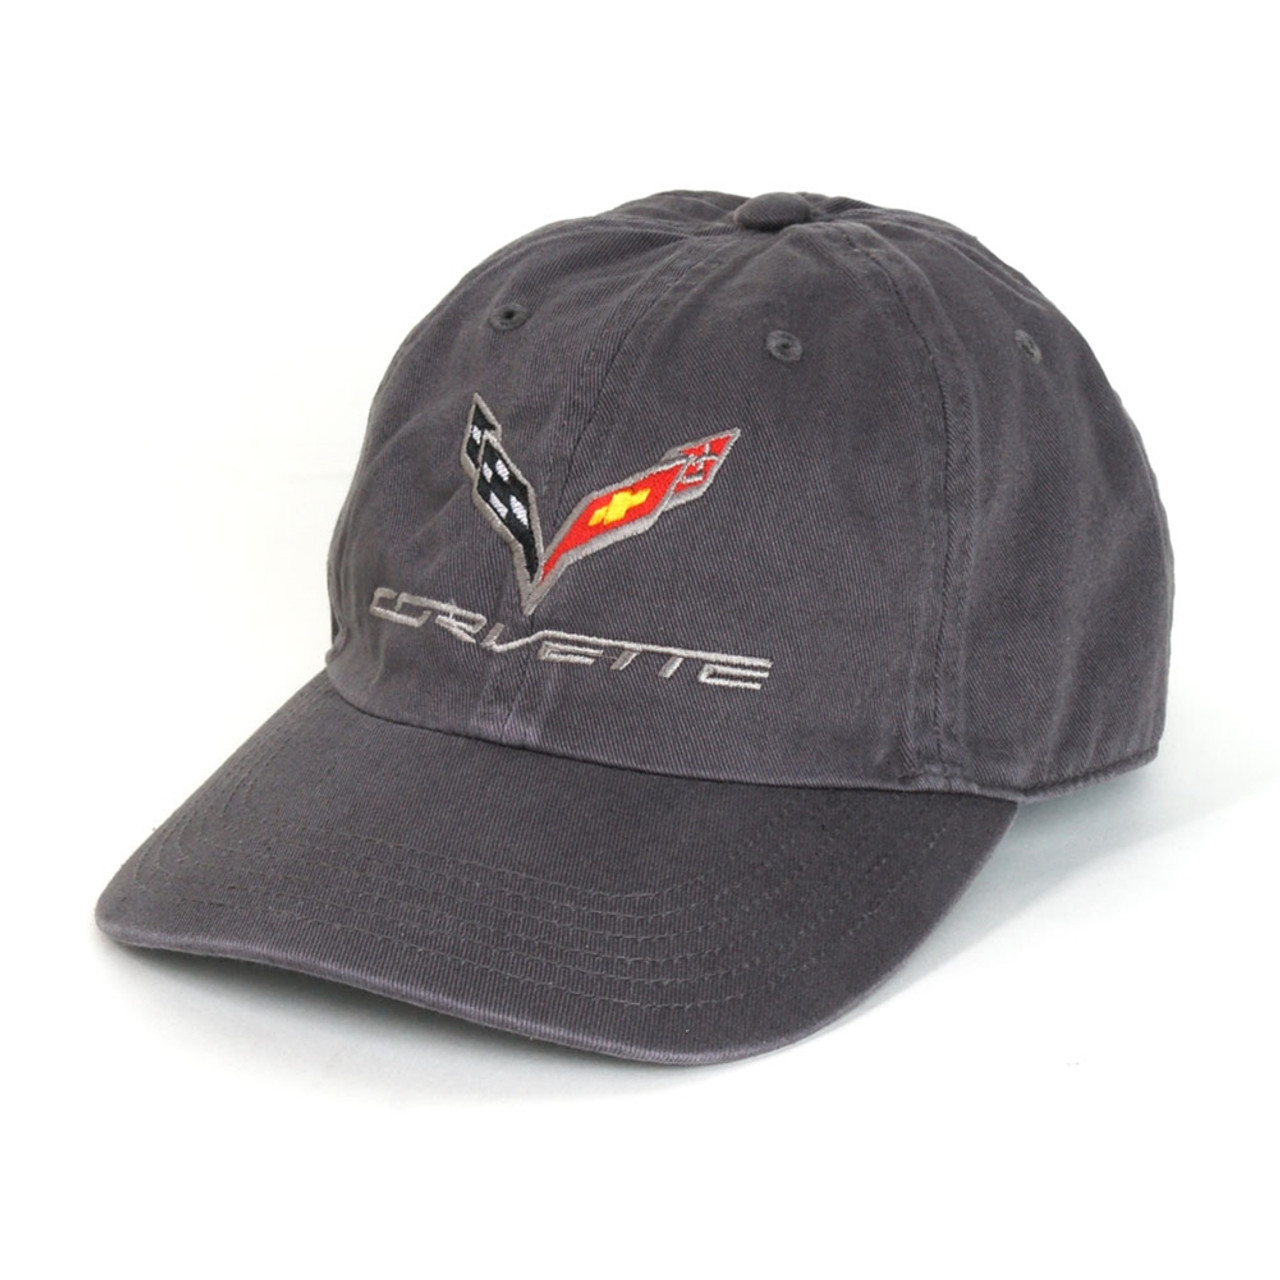 C7 Corvette Charcoal Gray Washed Hat